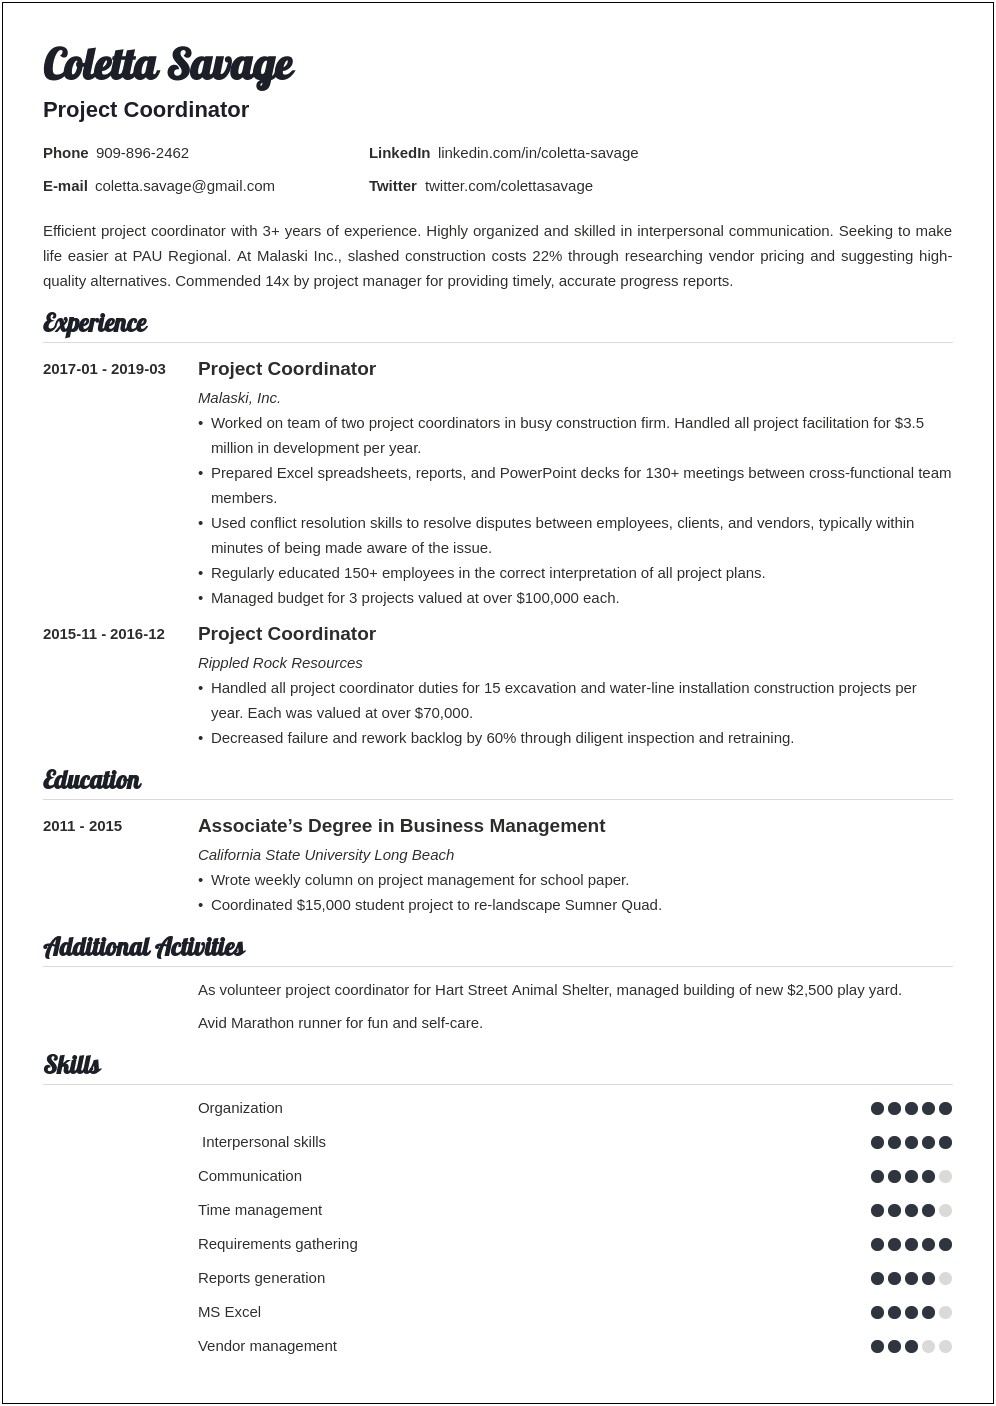 Resume With Summary For Service Coordinator